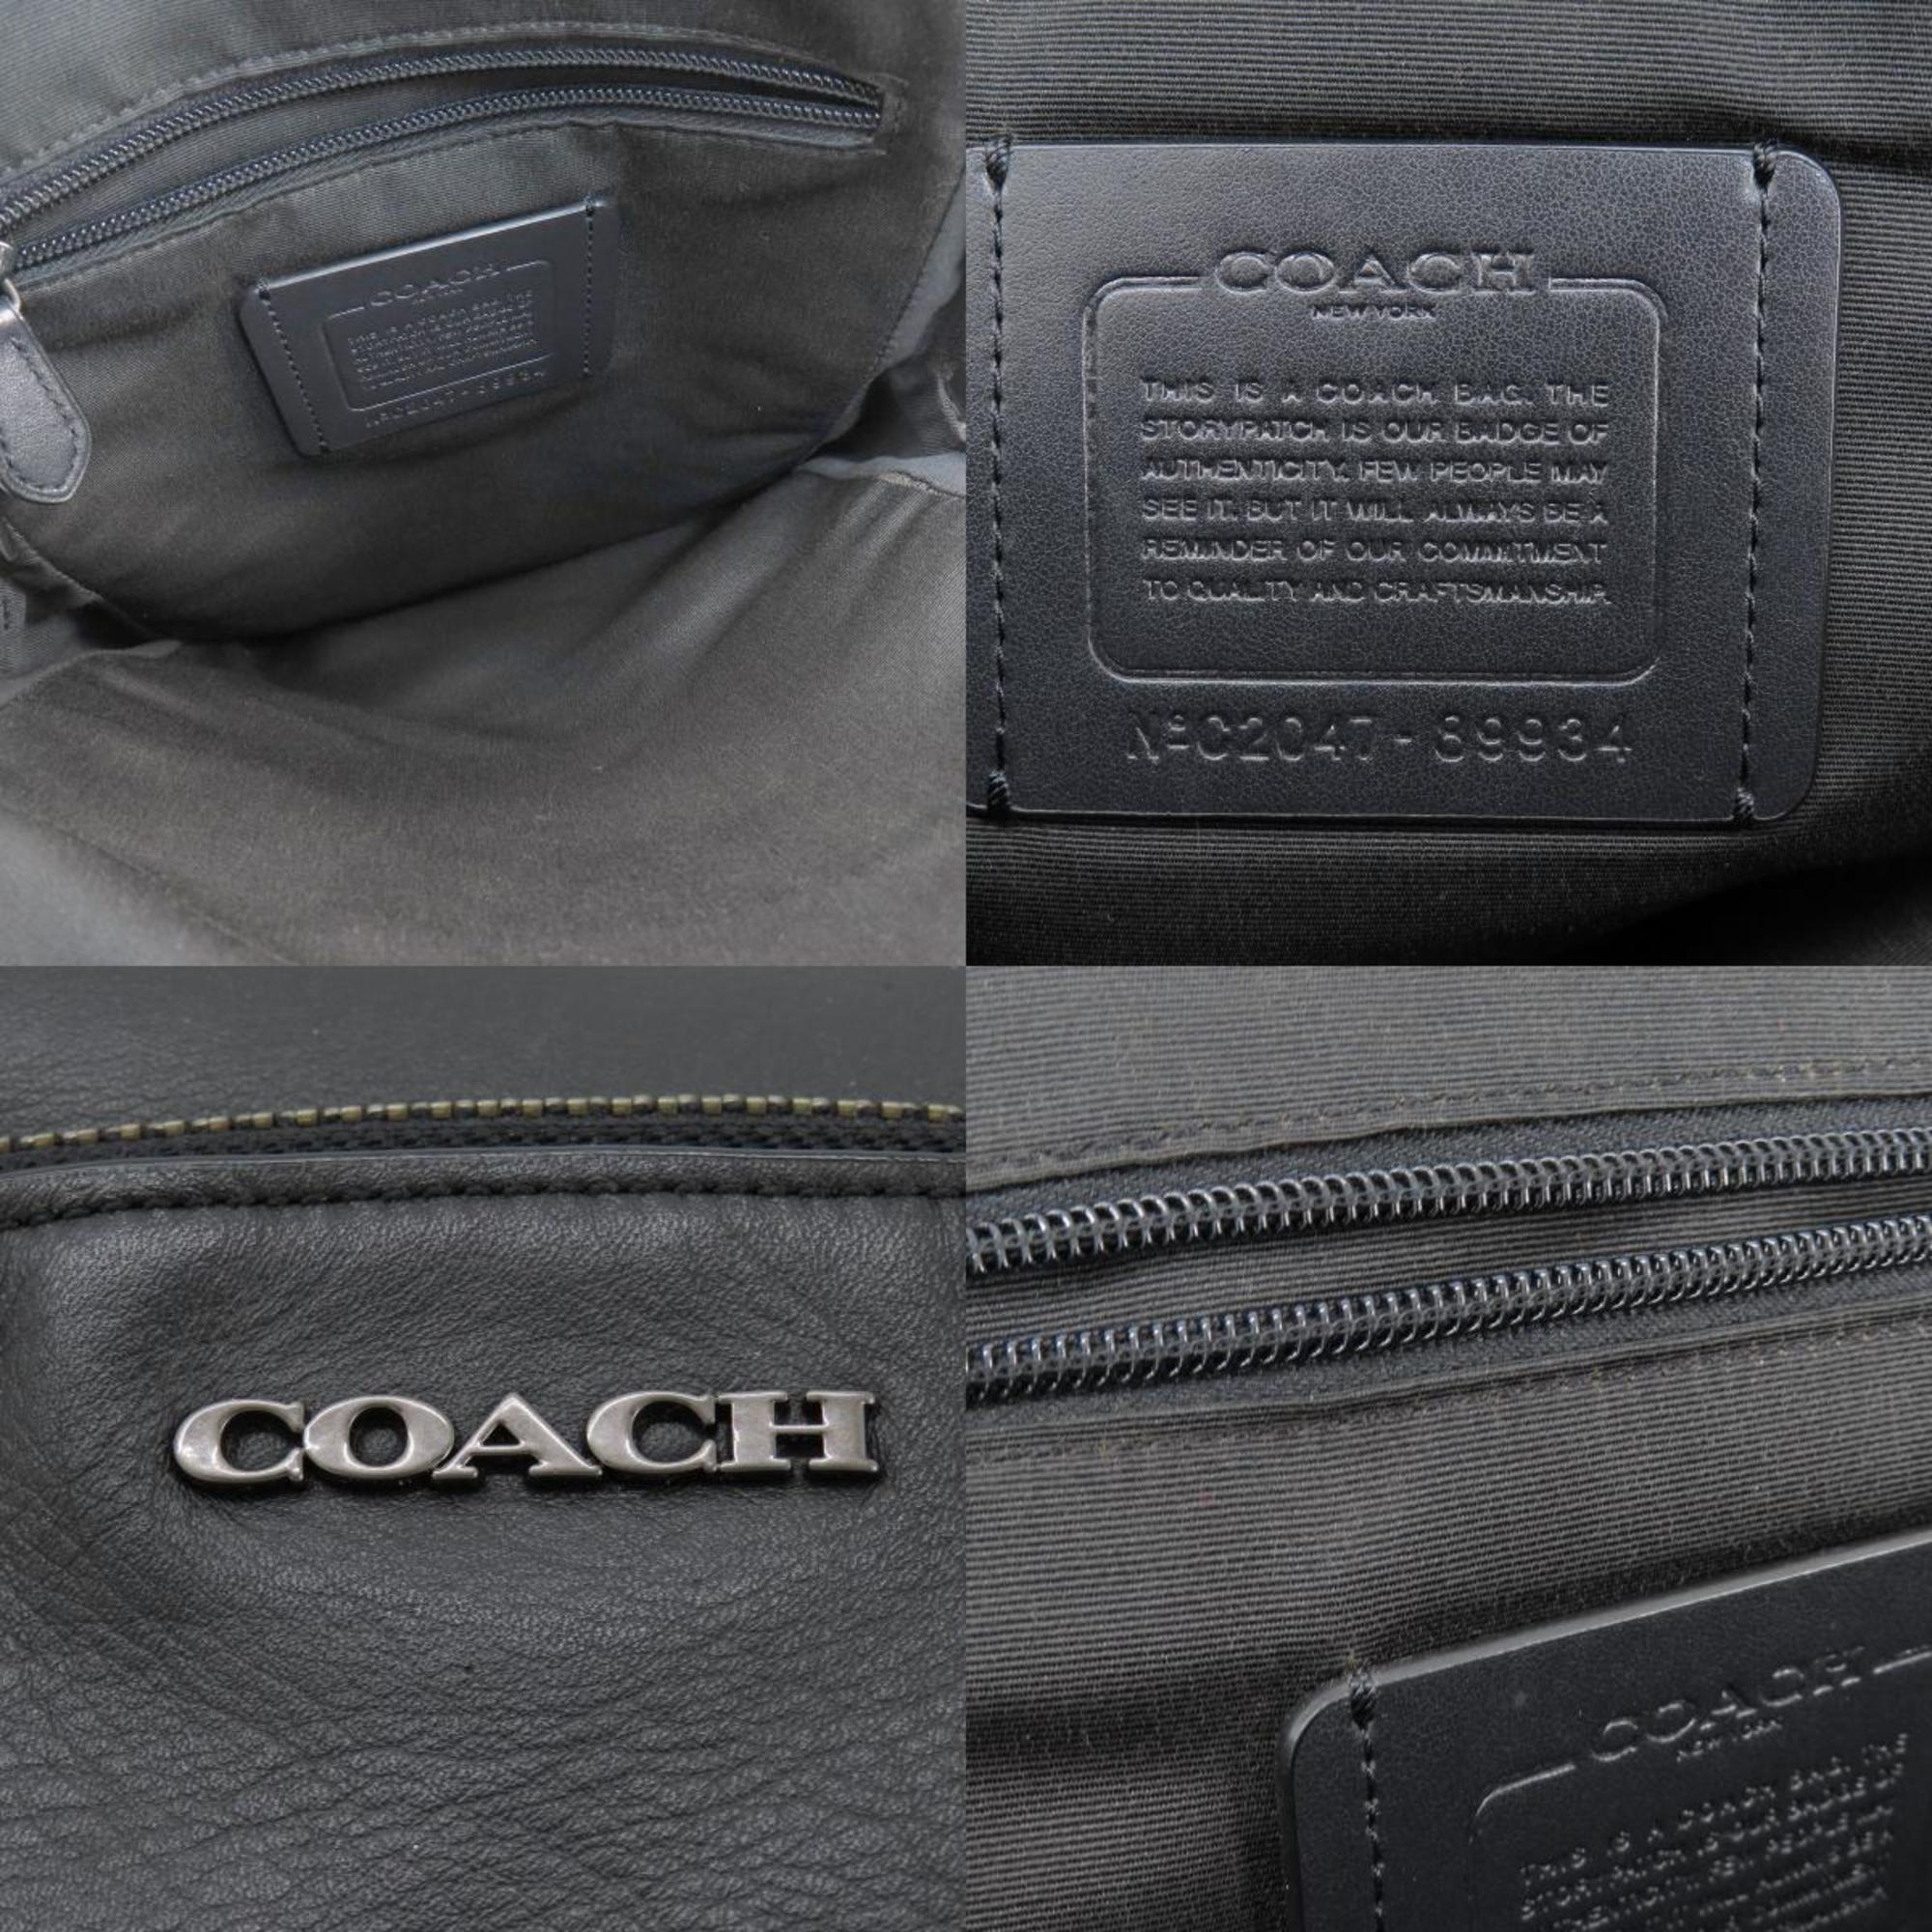 Coach 89934 Leather Body Bag for Women